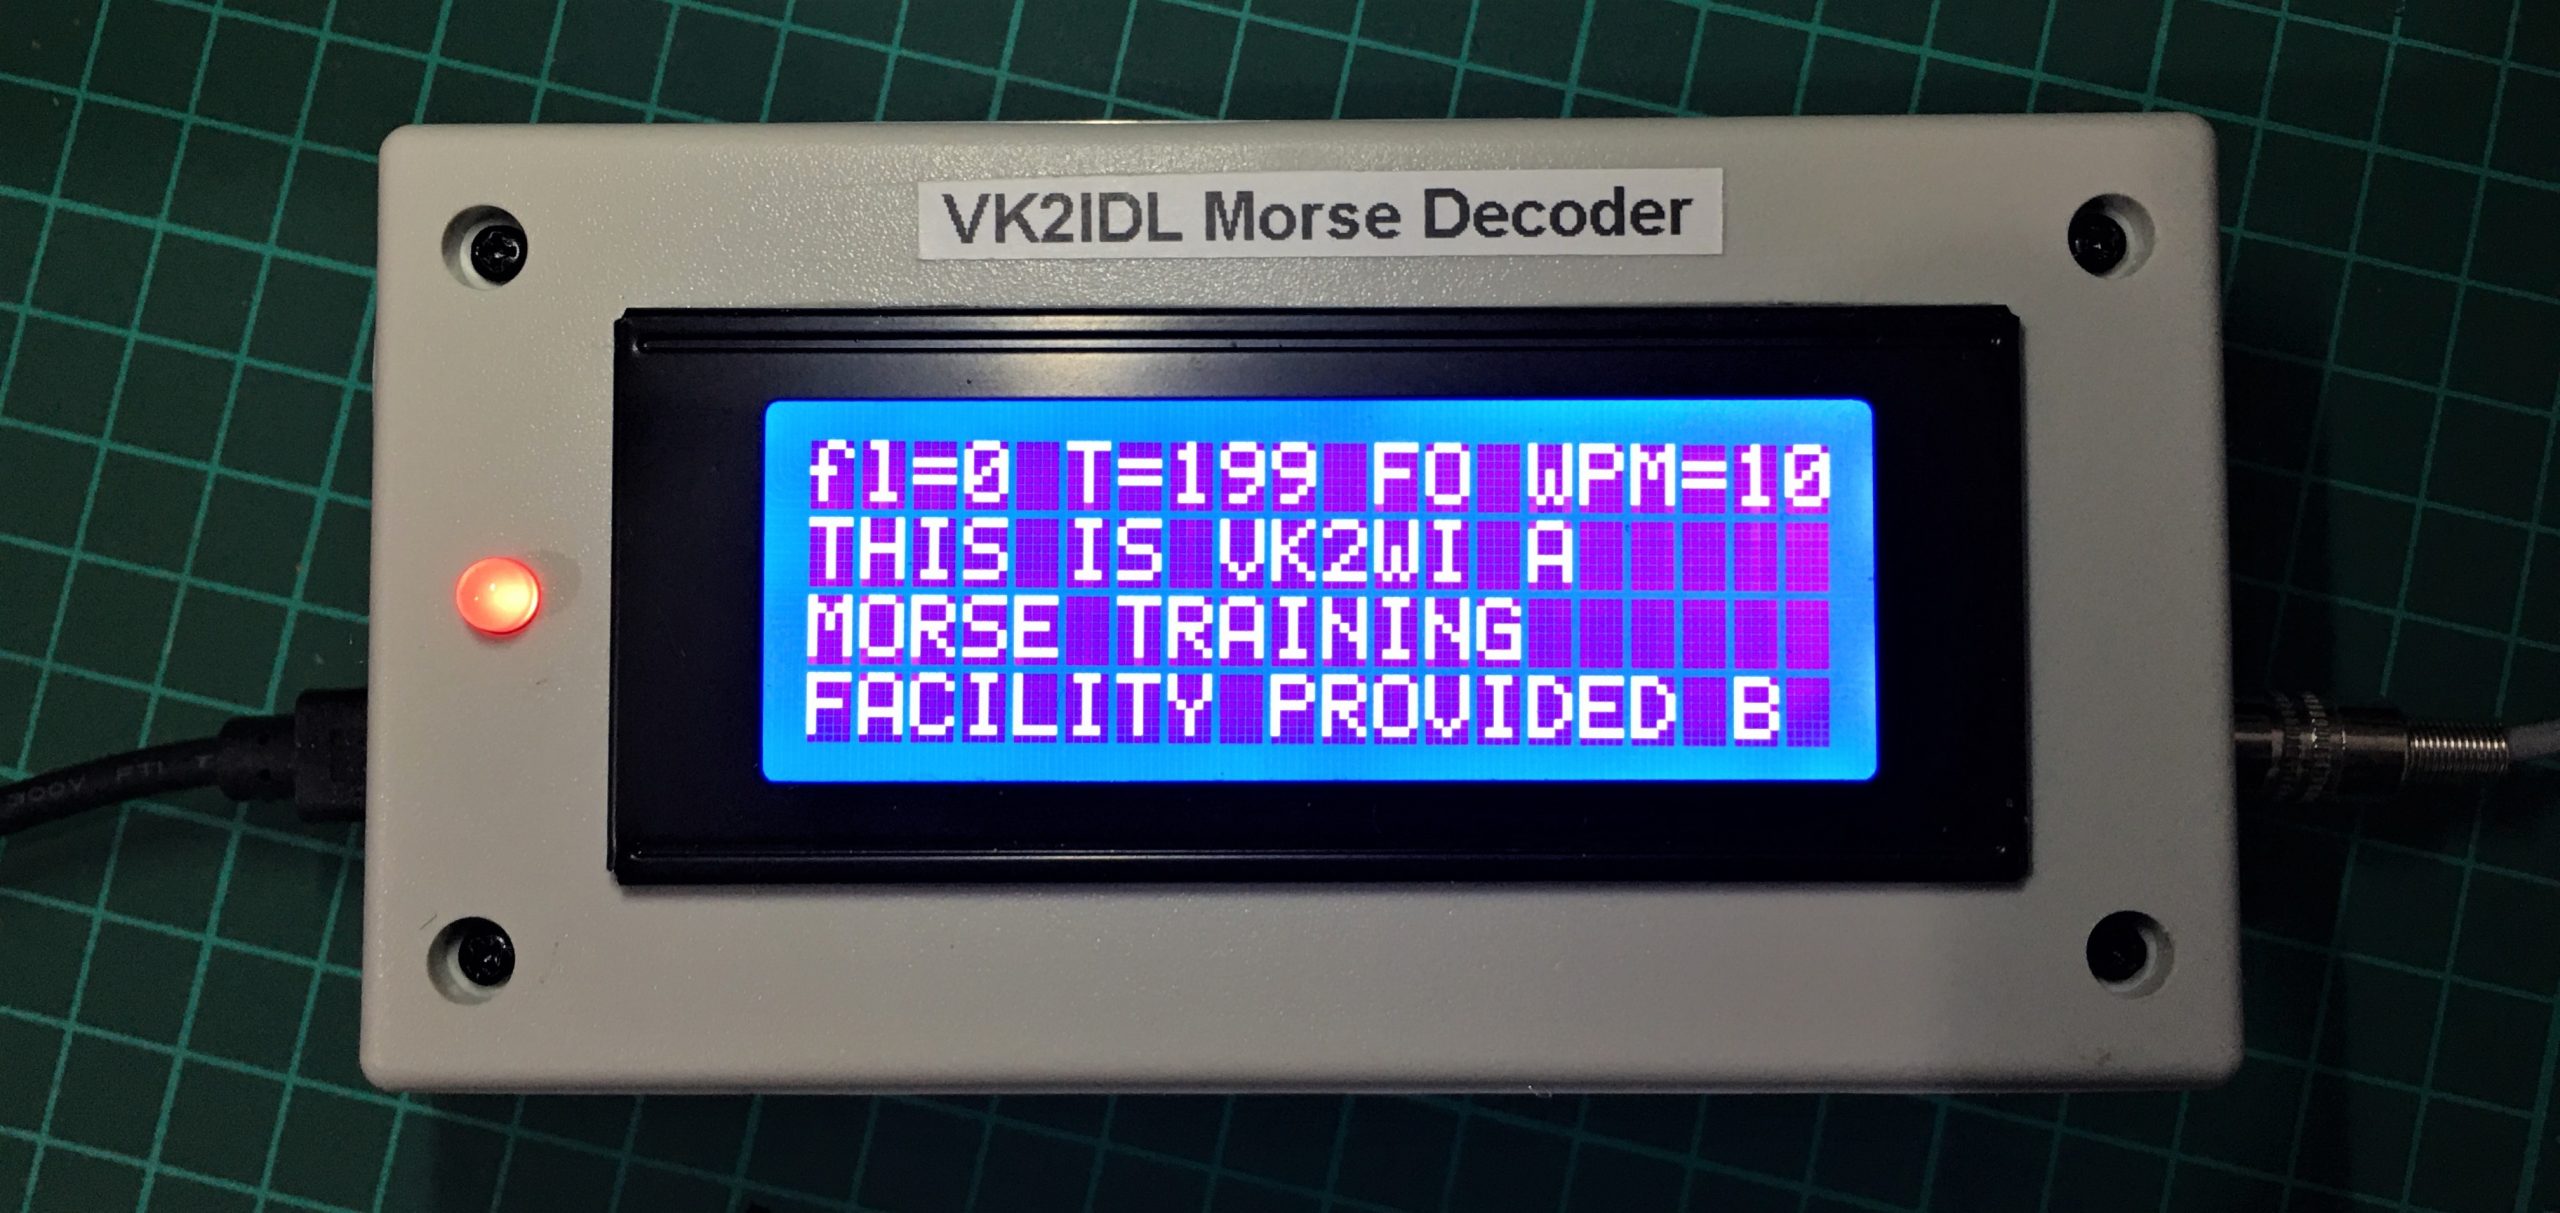 VK2IDL Morse Decoder displaying live Morse from the VK2WI automated Morse practice transmission on 3.699 MHz.